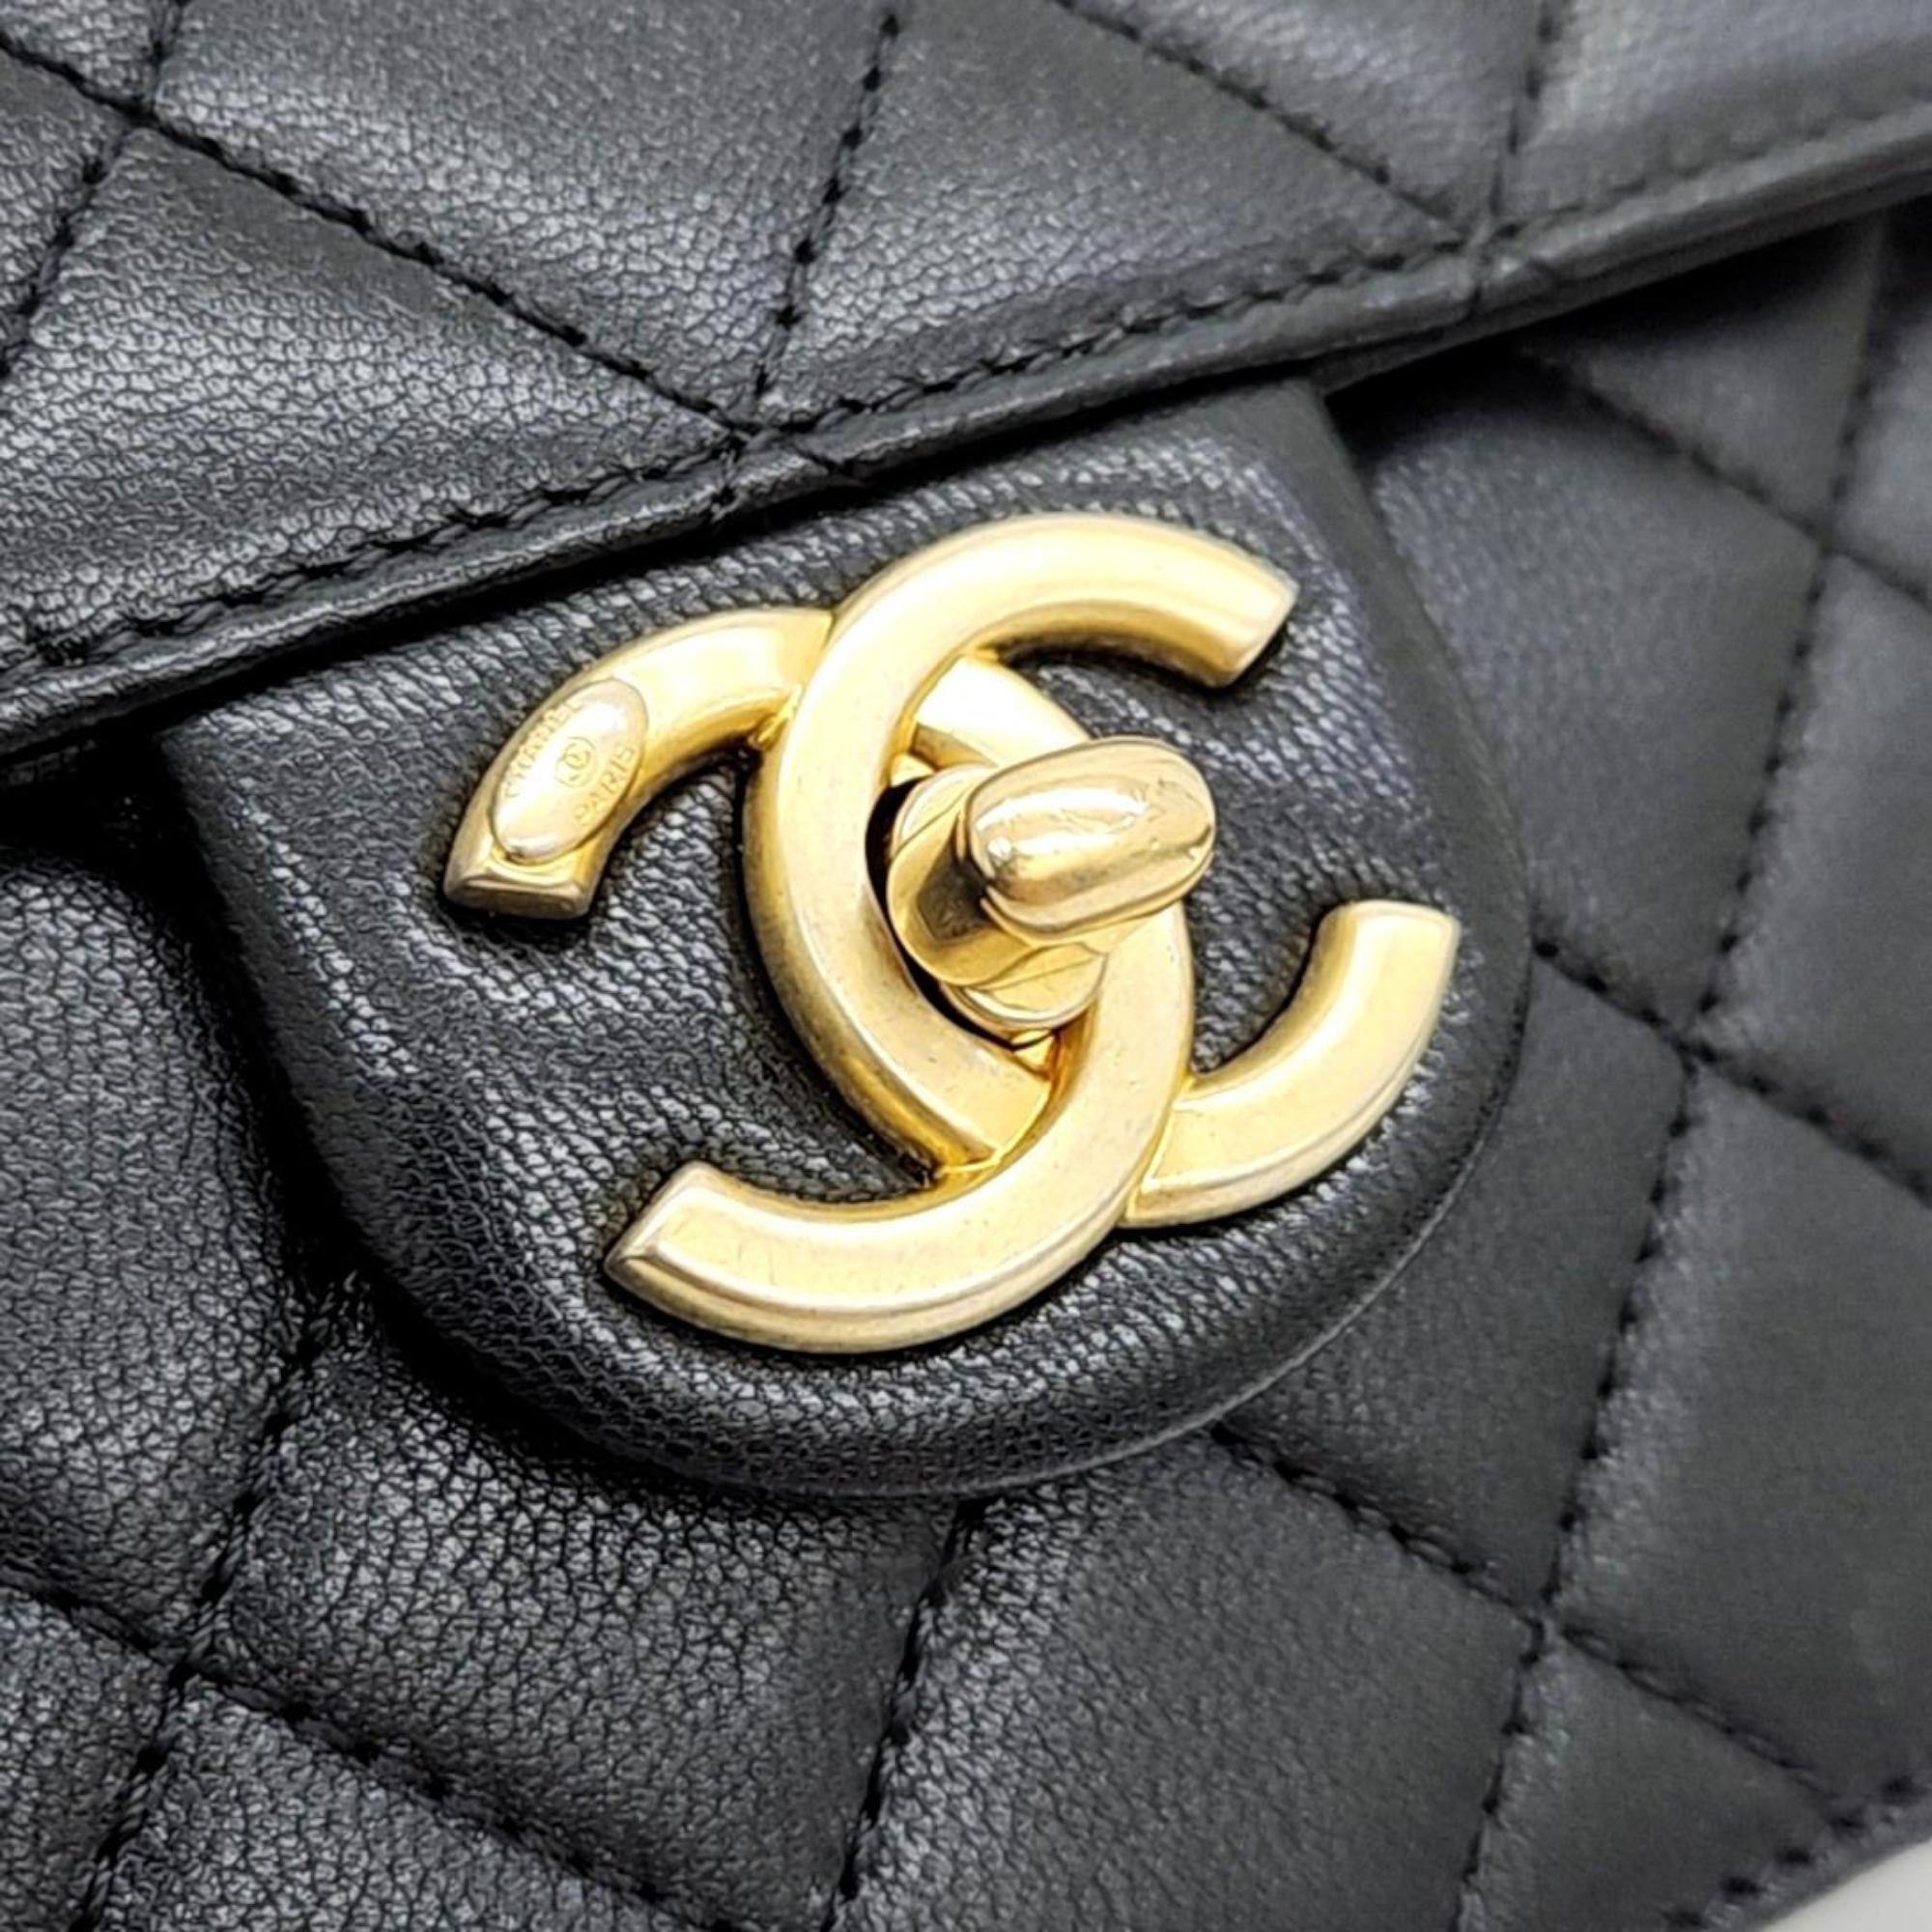 Chanel Black Leather Chic Pearl Flap Bag